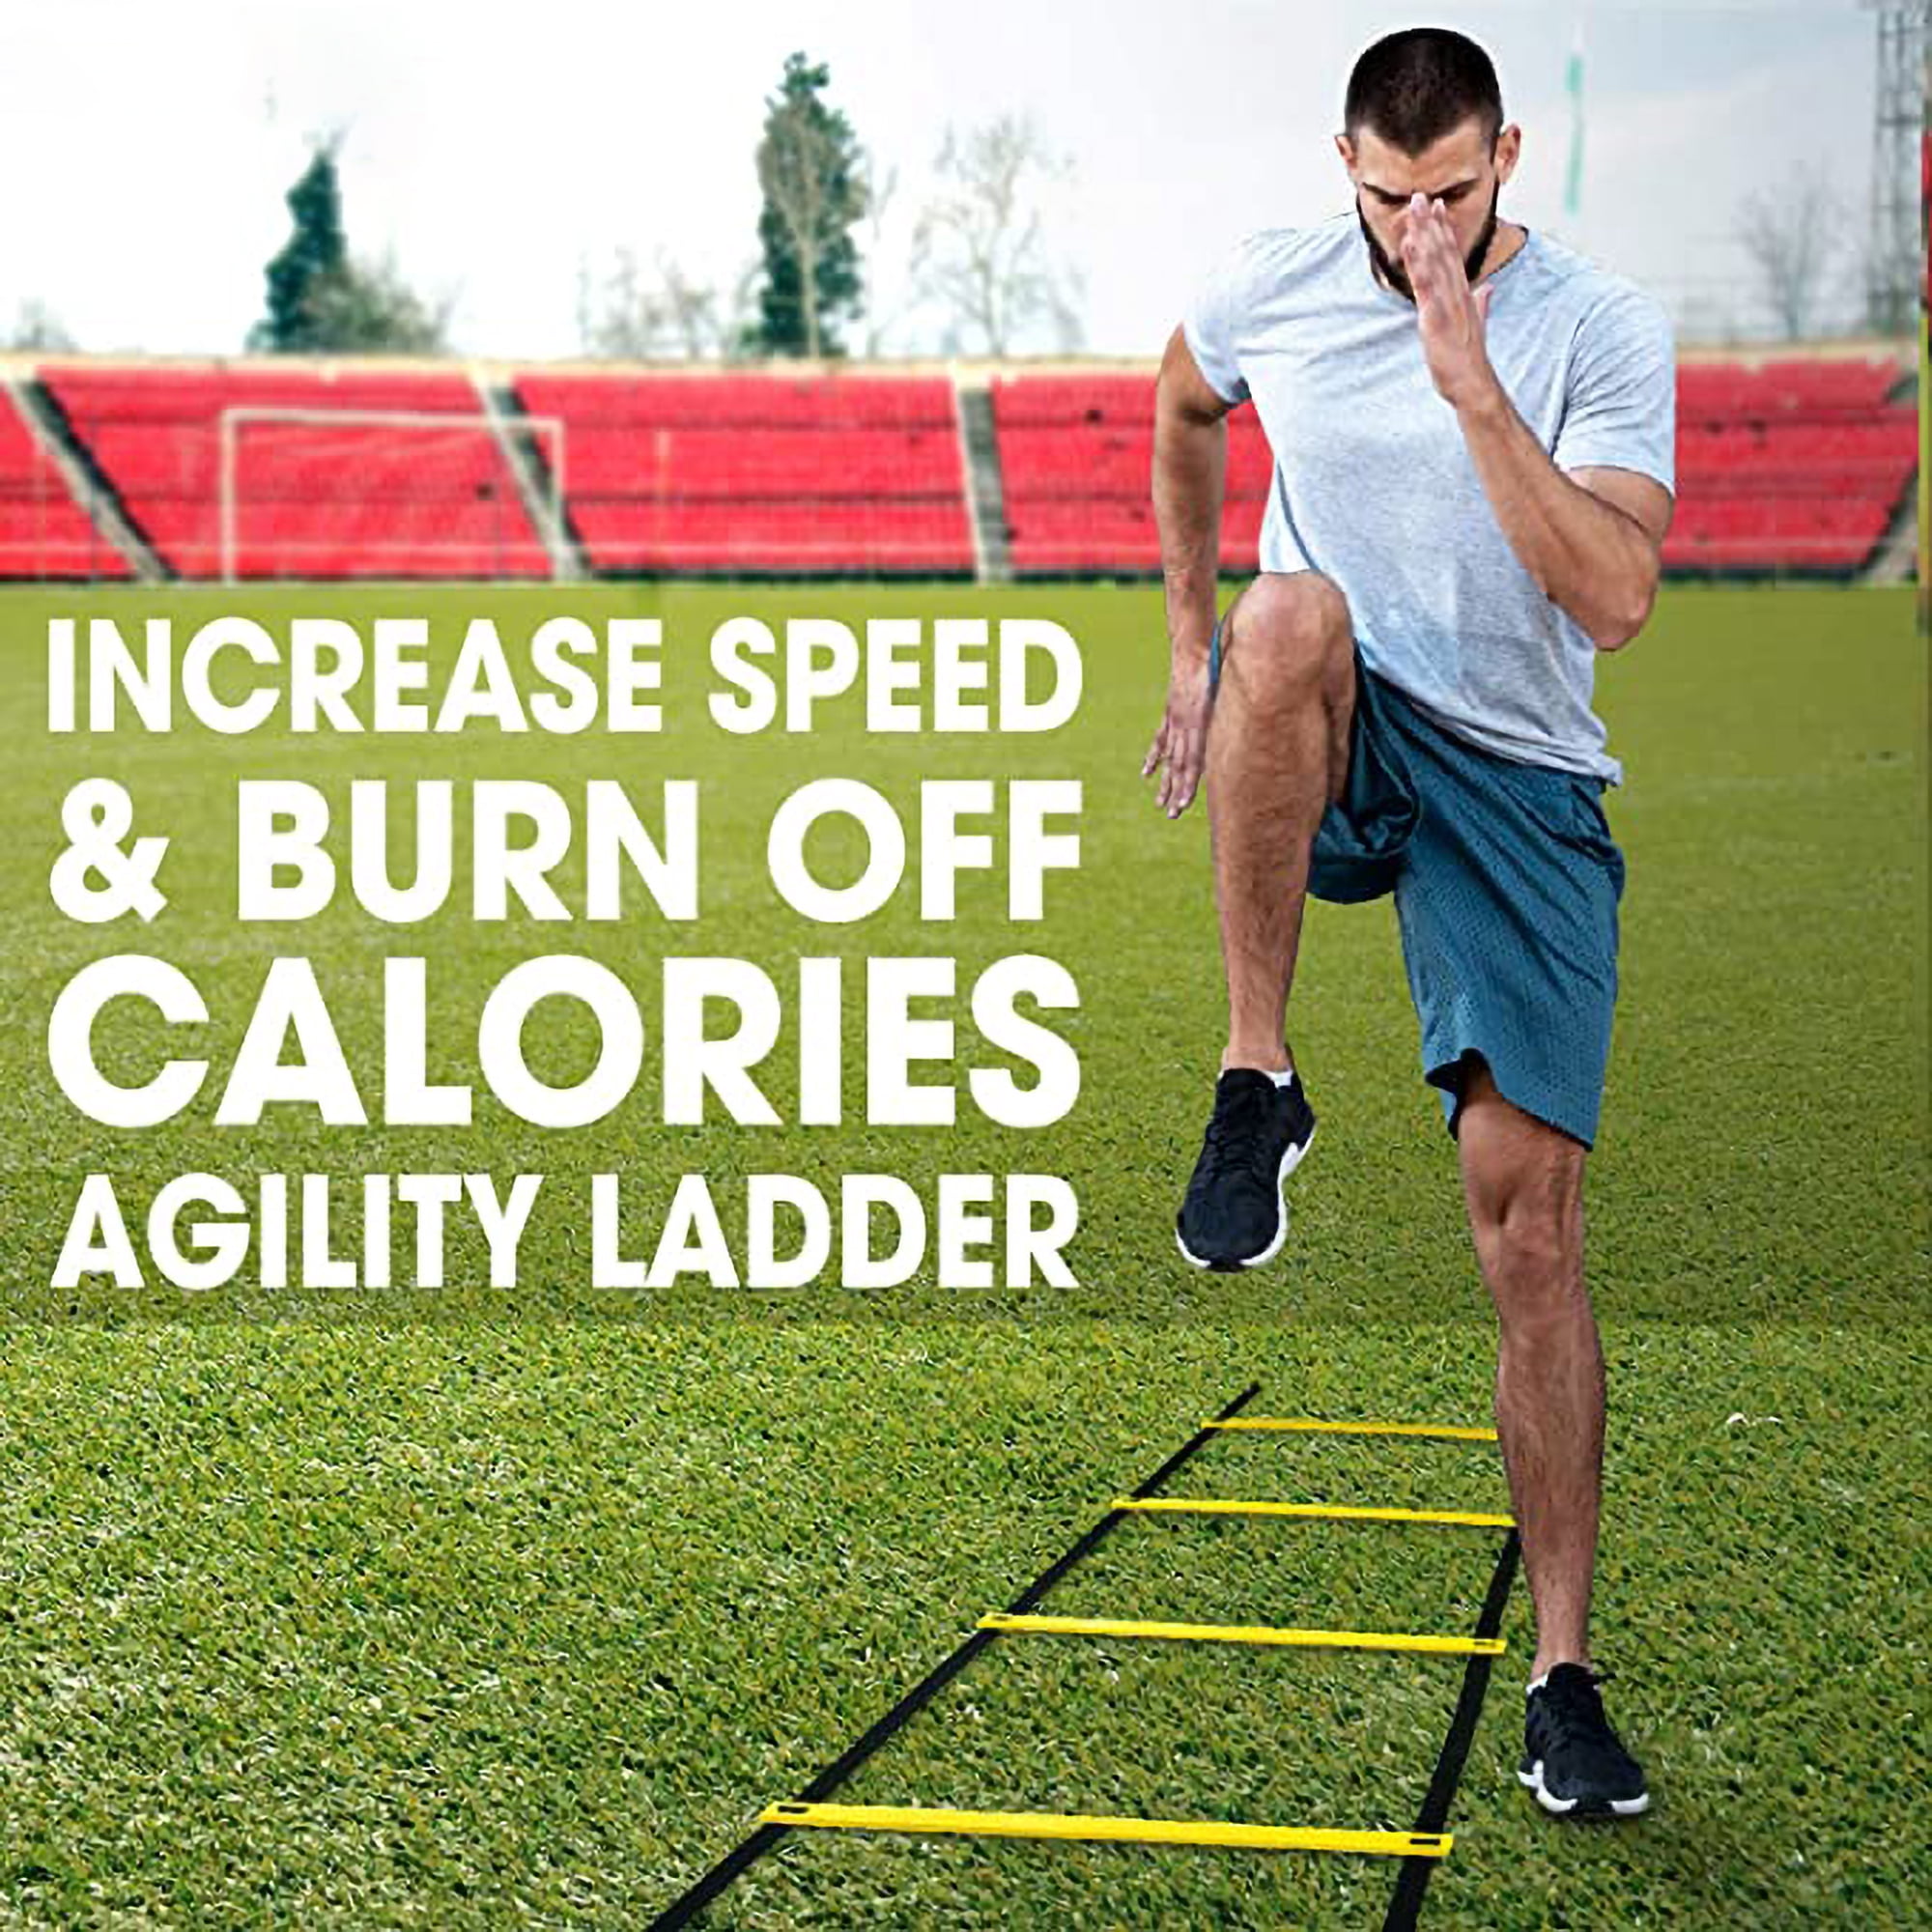 22ft 13 Section Rung Speed Training Exercise Ladde All In Sports Agility Ladder 